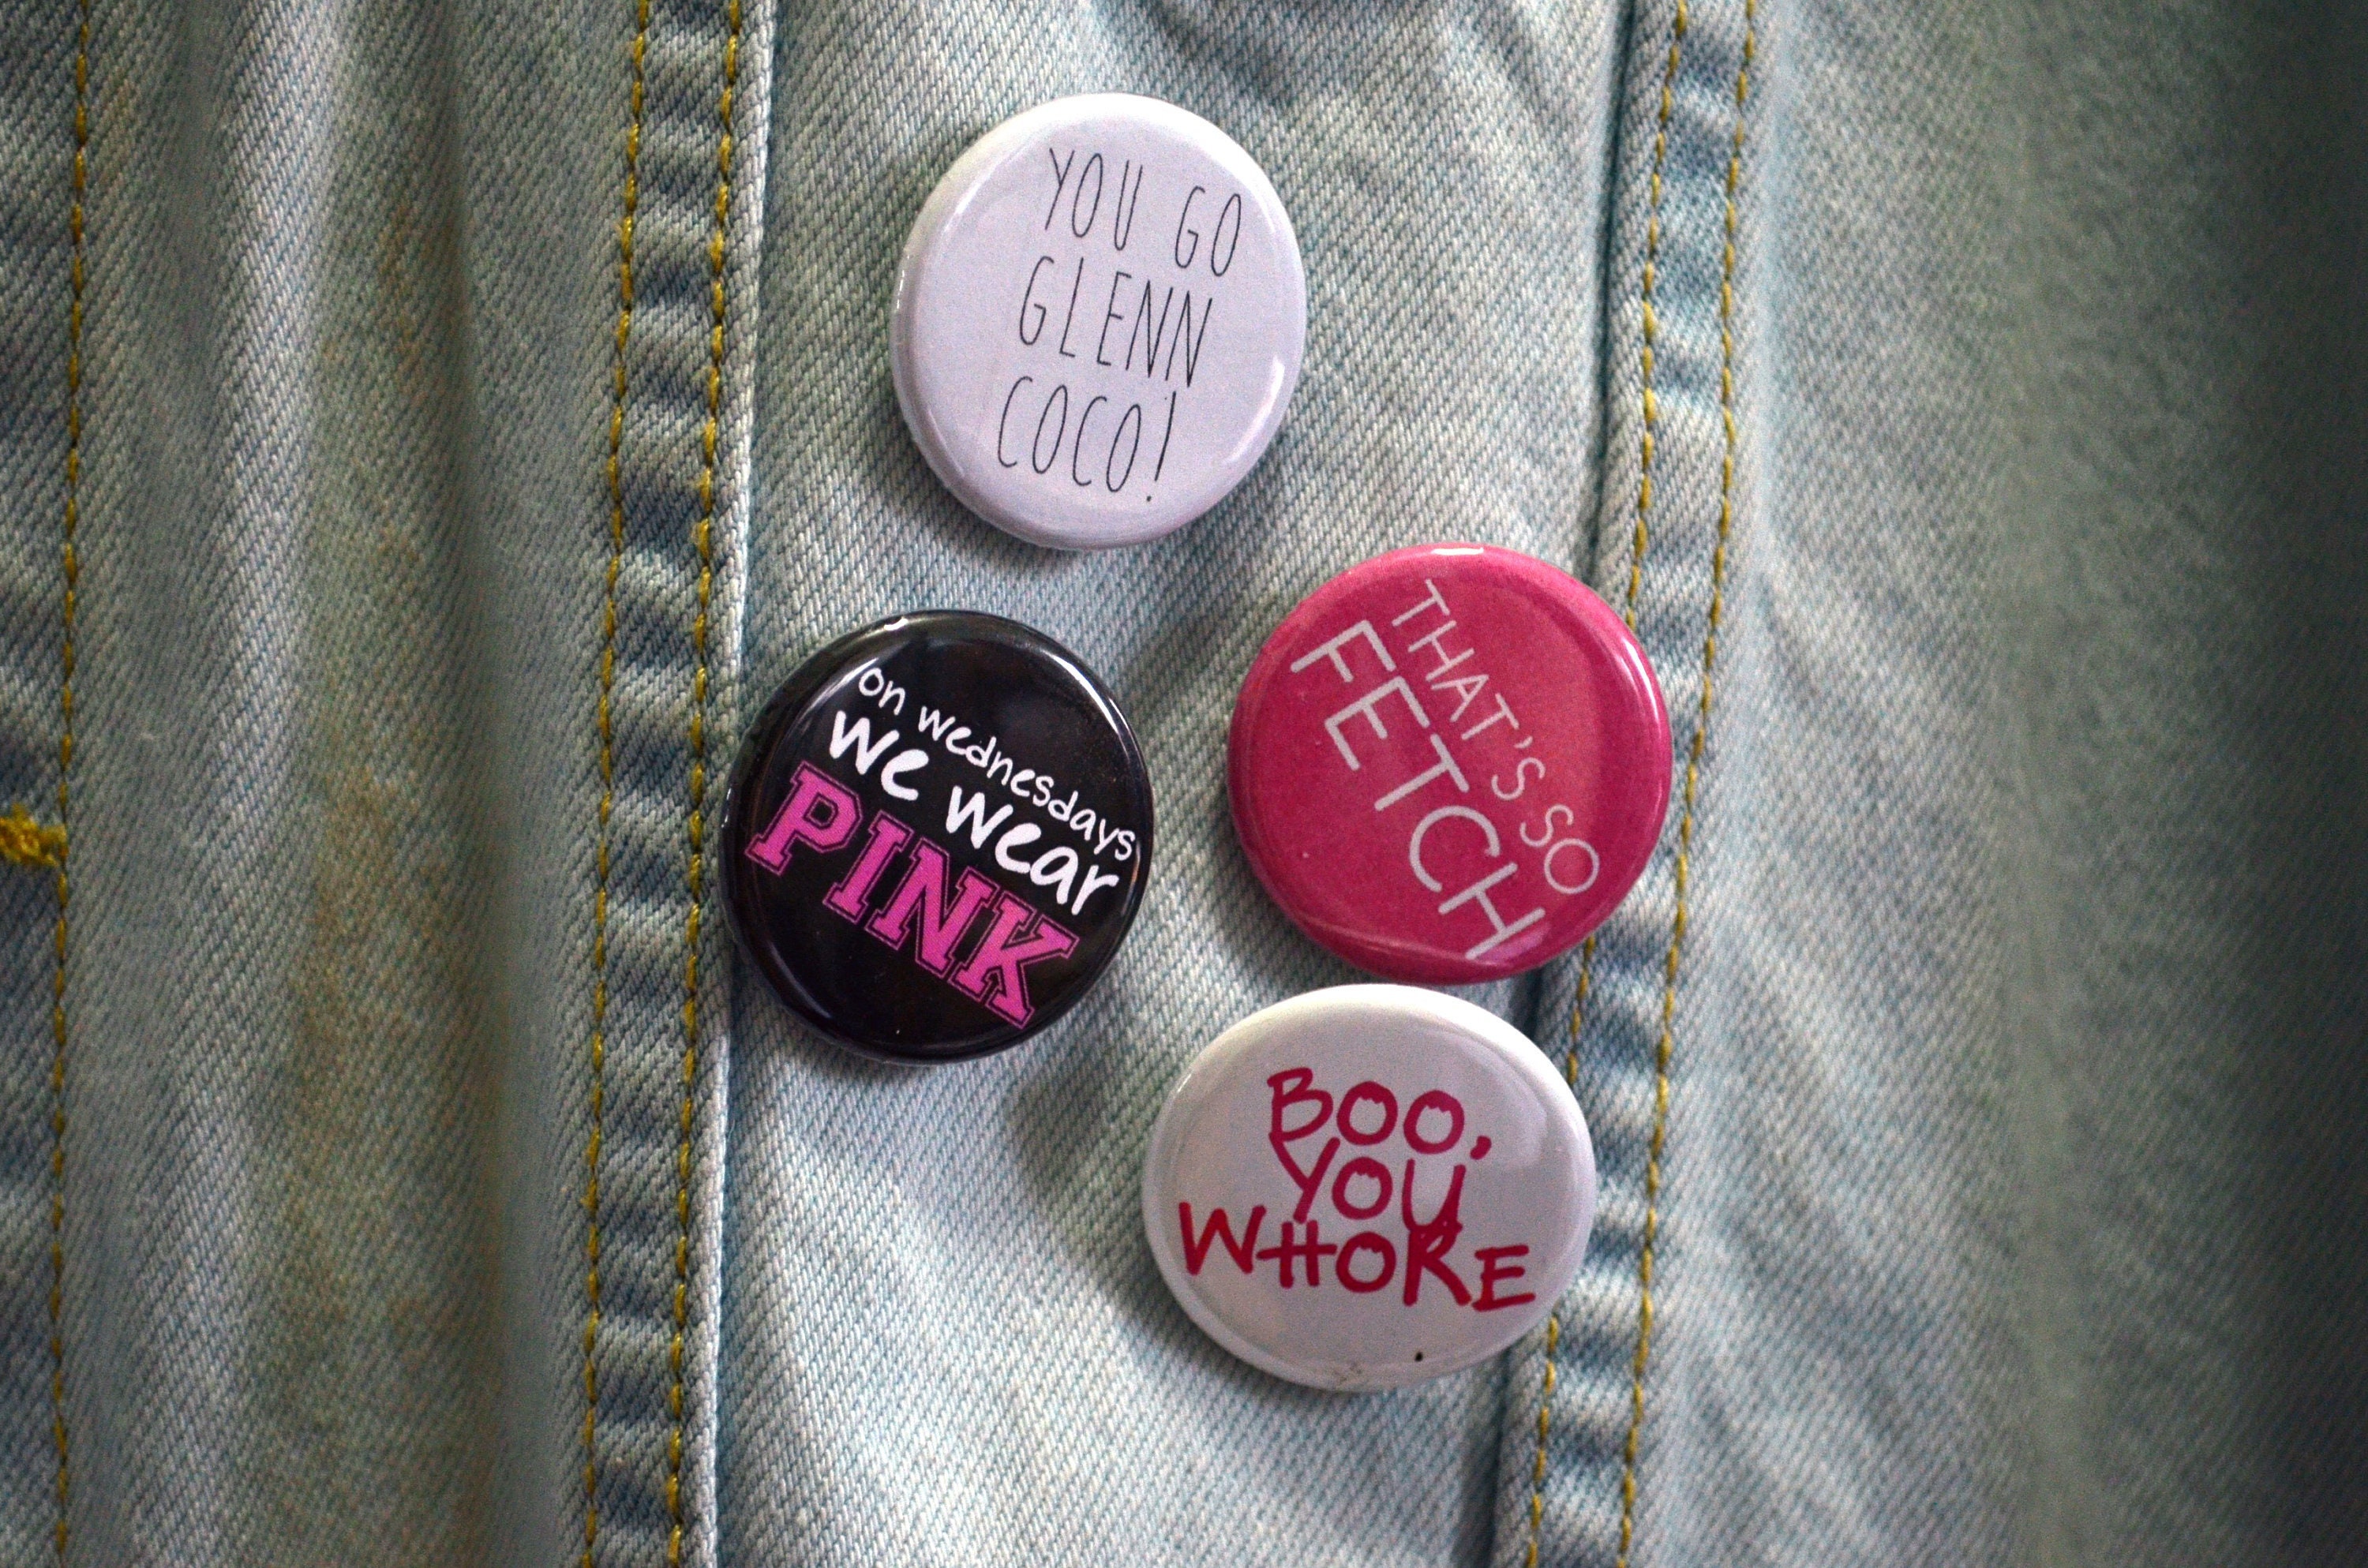 MEAN GIRLS Badge Pack on Wednesdays We Wear Pink Pin Button -  Sweden